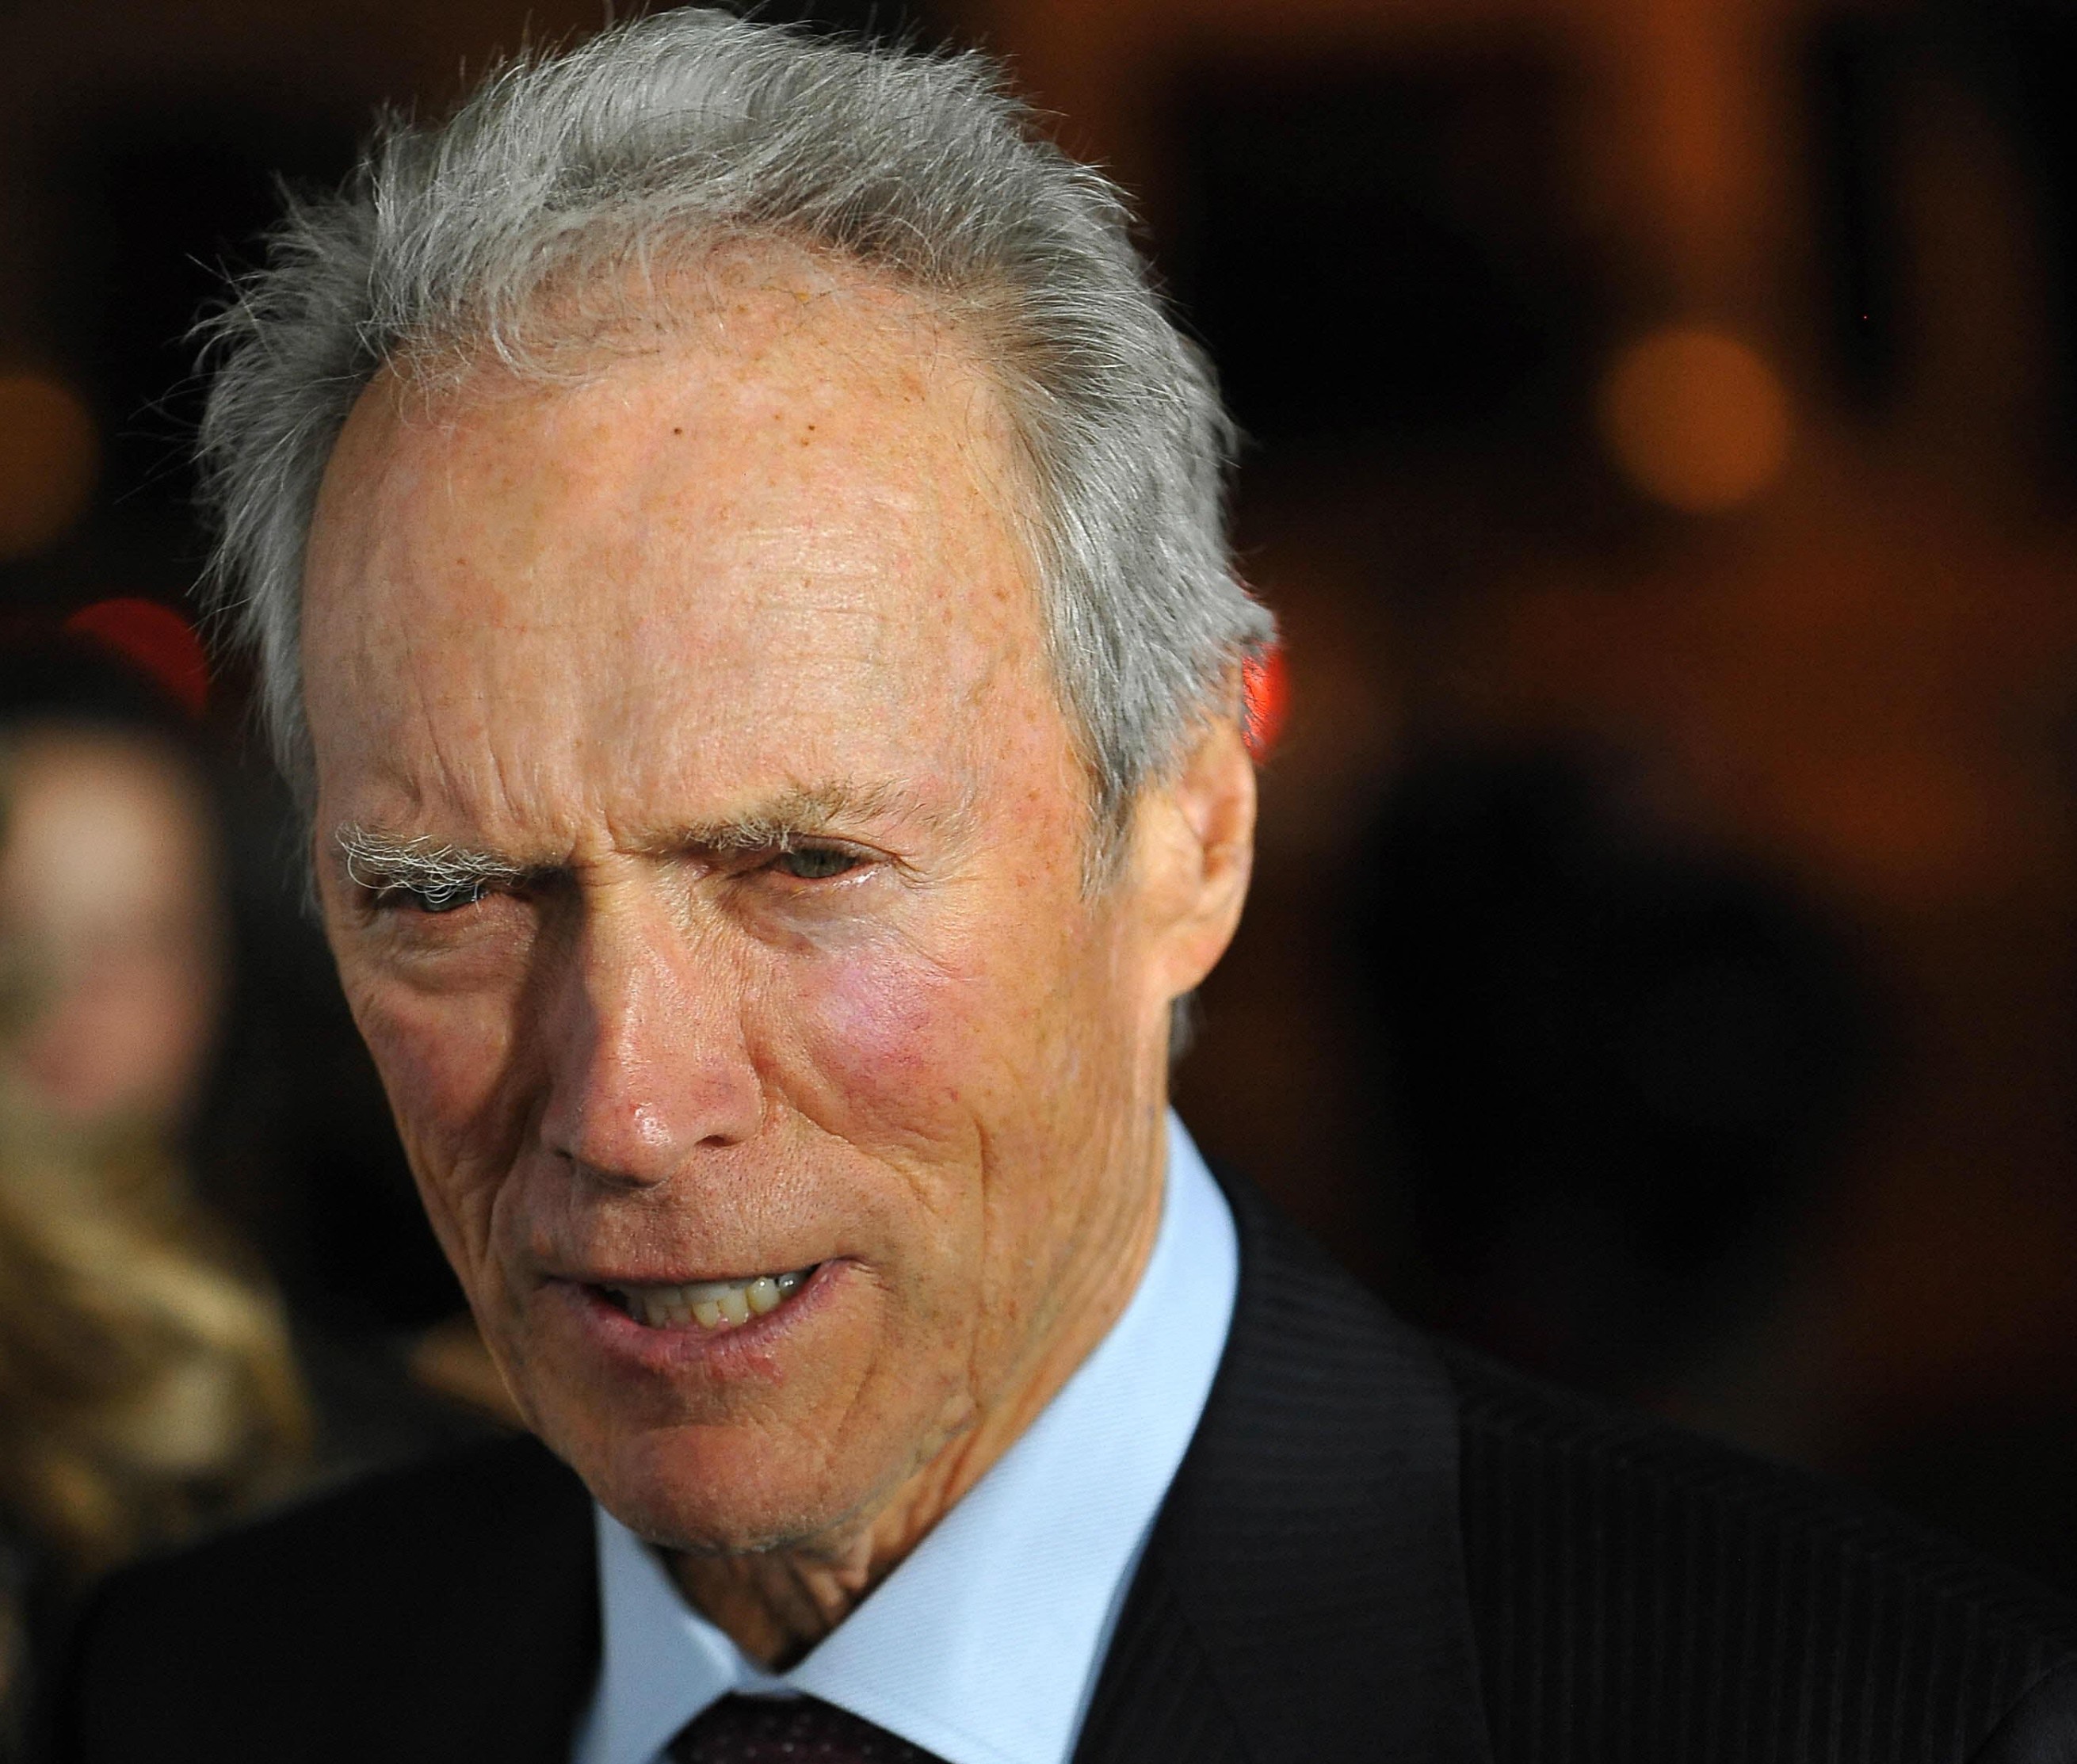 Clint Eastwood has been doing the crusty curmudgeon for a while